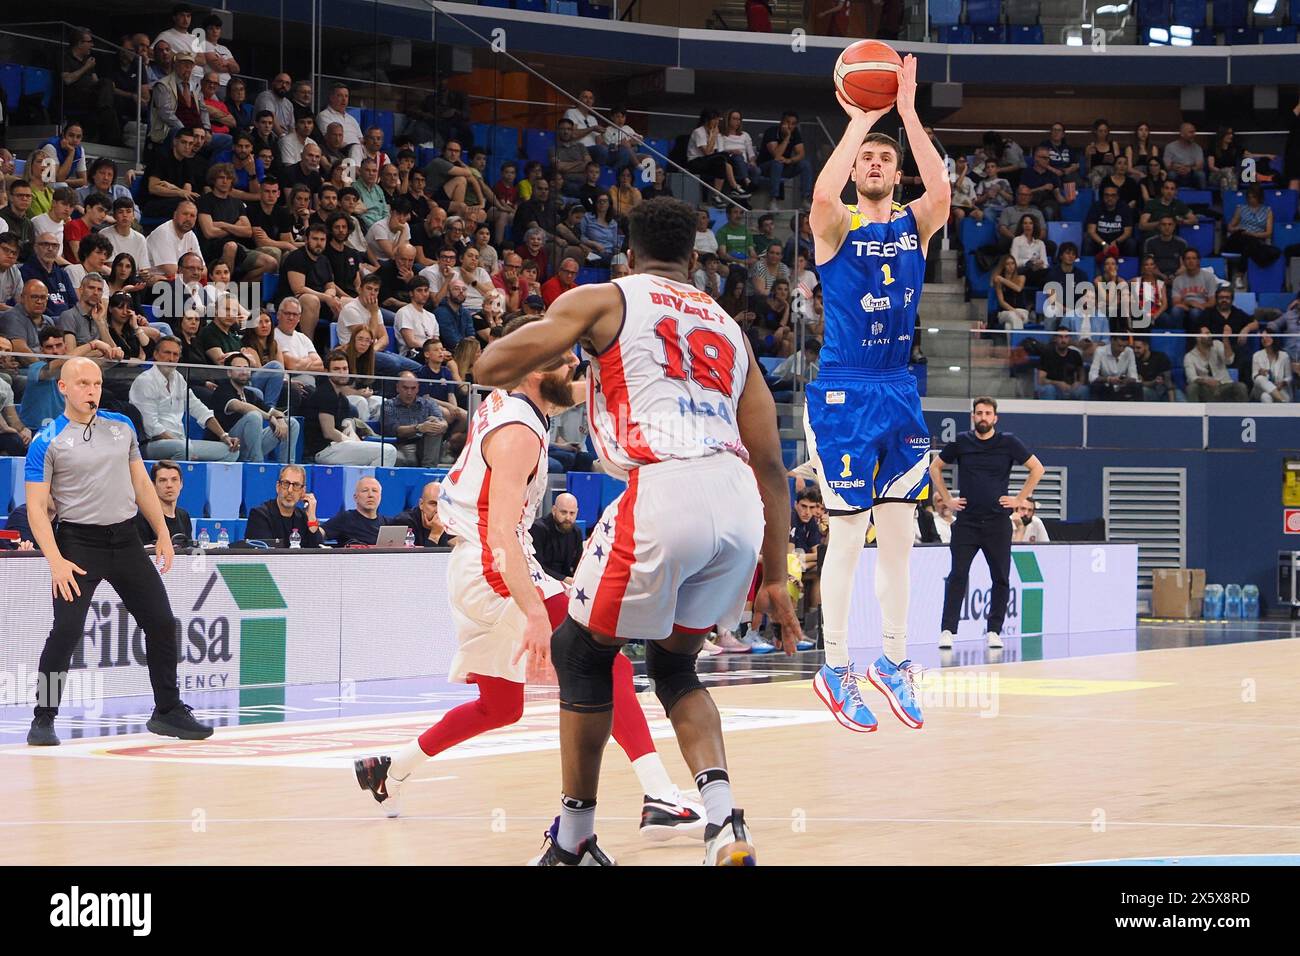 Milan, Italy. 11th May, 2024. Francesco Stefanelli - Scaligera Tezenis Verona during Playoff - Urania Milano vs Tezenis Verona, Italian Basketball Serie A2 Men match in Milan, Italy, May 11 2024 Credit: Independent Photo Agency/Alamy Live News Stock Photo